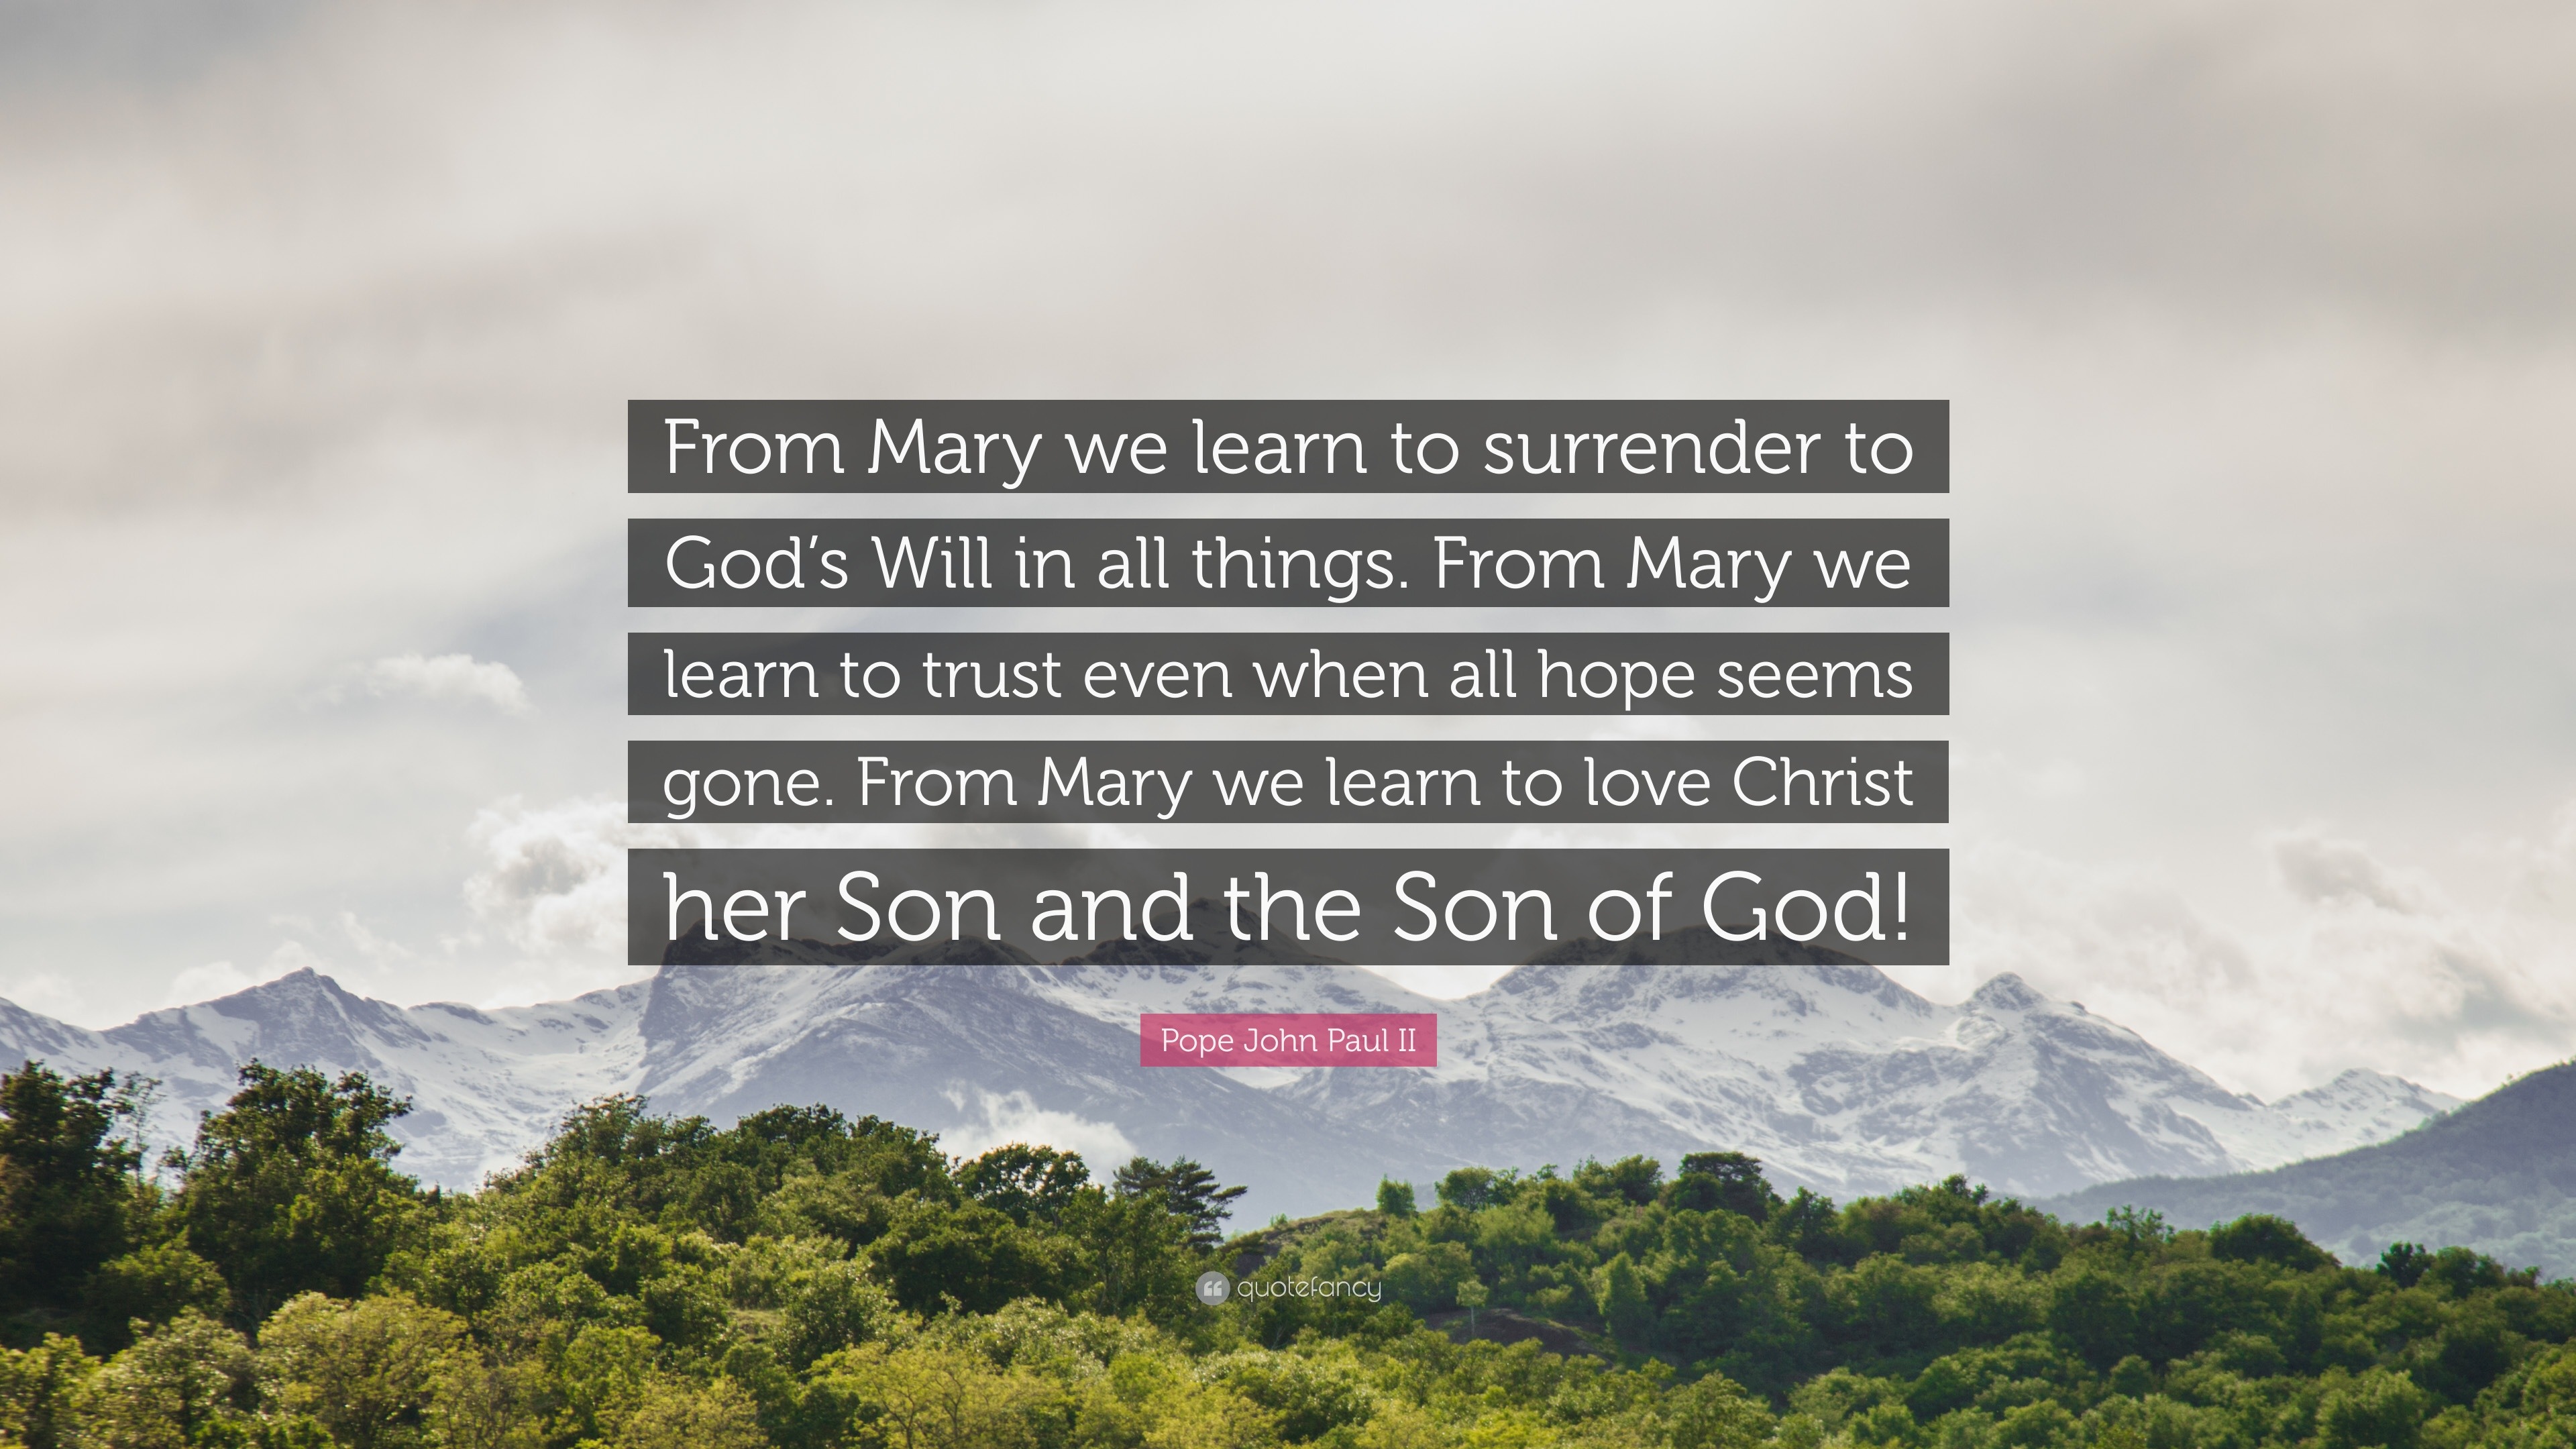 Pope John Paul Ii Quote From Mary We Learn To Surrender To God S Will In All Things From Mary We Learn To Trust Even When All Hope Seems Gone